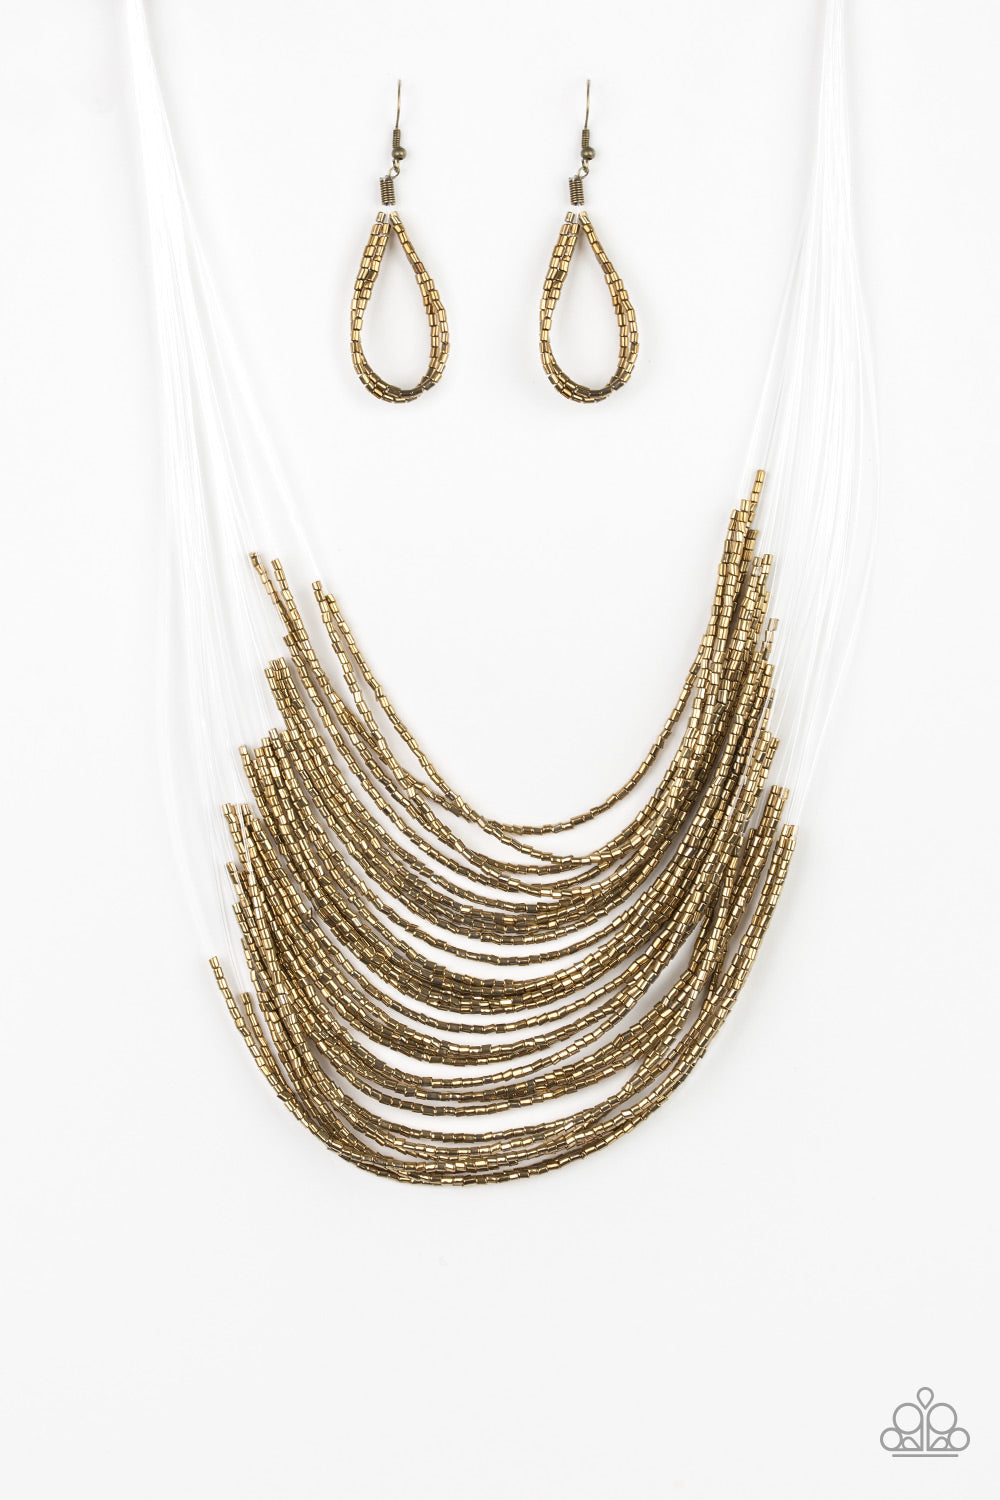 Catwalk Queen Brass Seed Bead Necklace - Paparazzi Accessories Necklac – Divas $5 Bling